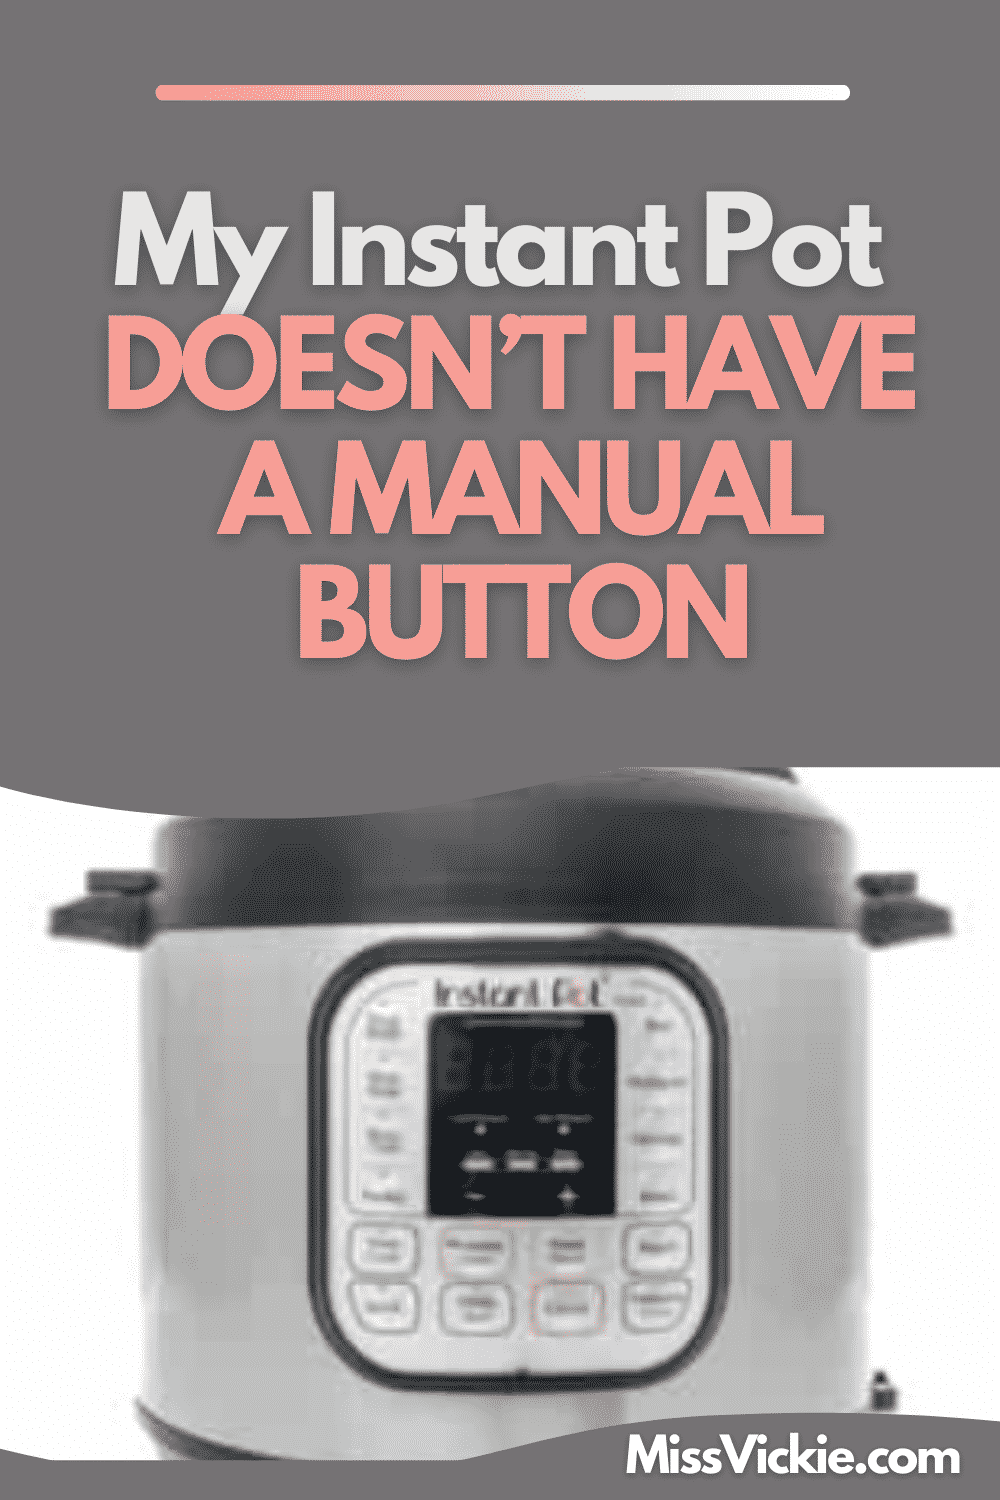 My Instant Pot Doesn't Have A Manual Button